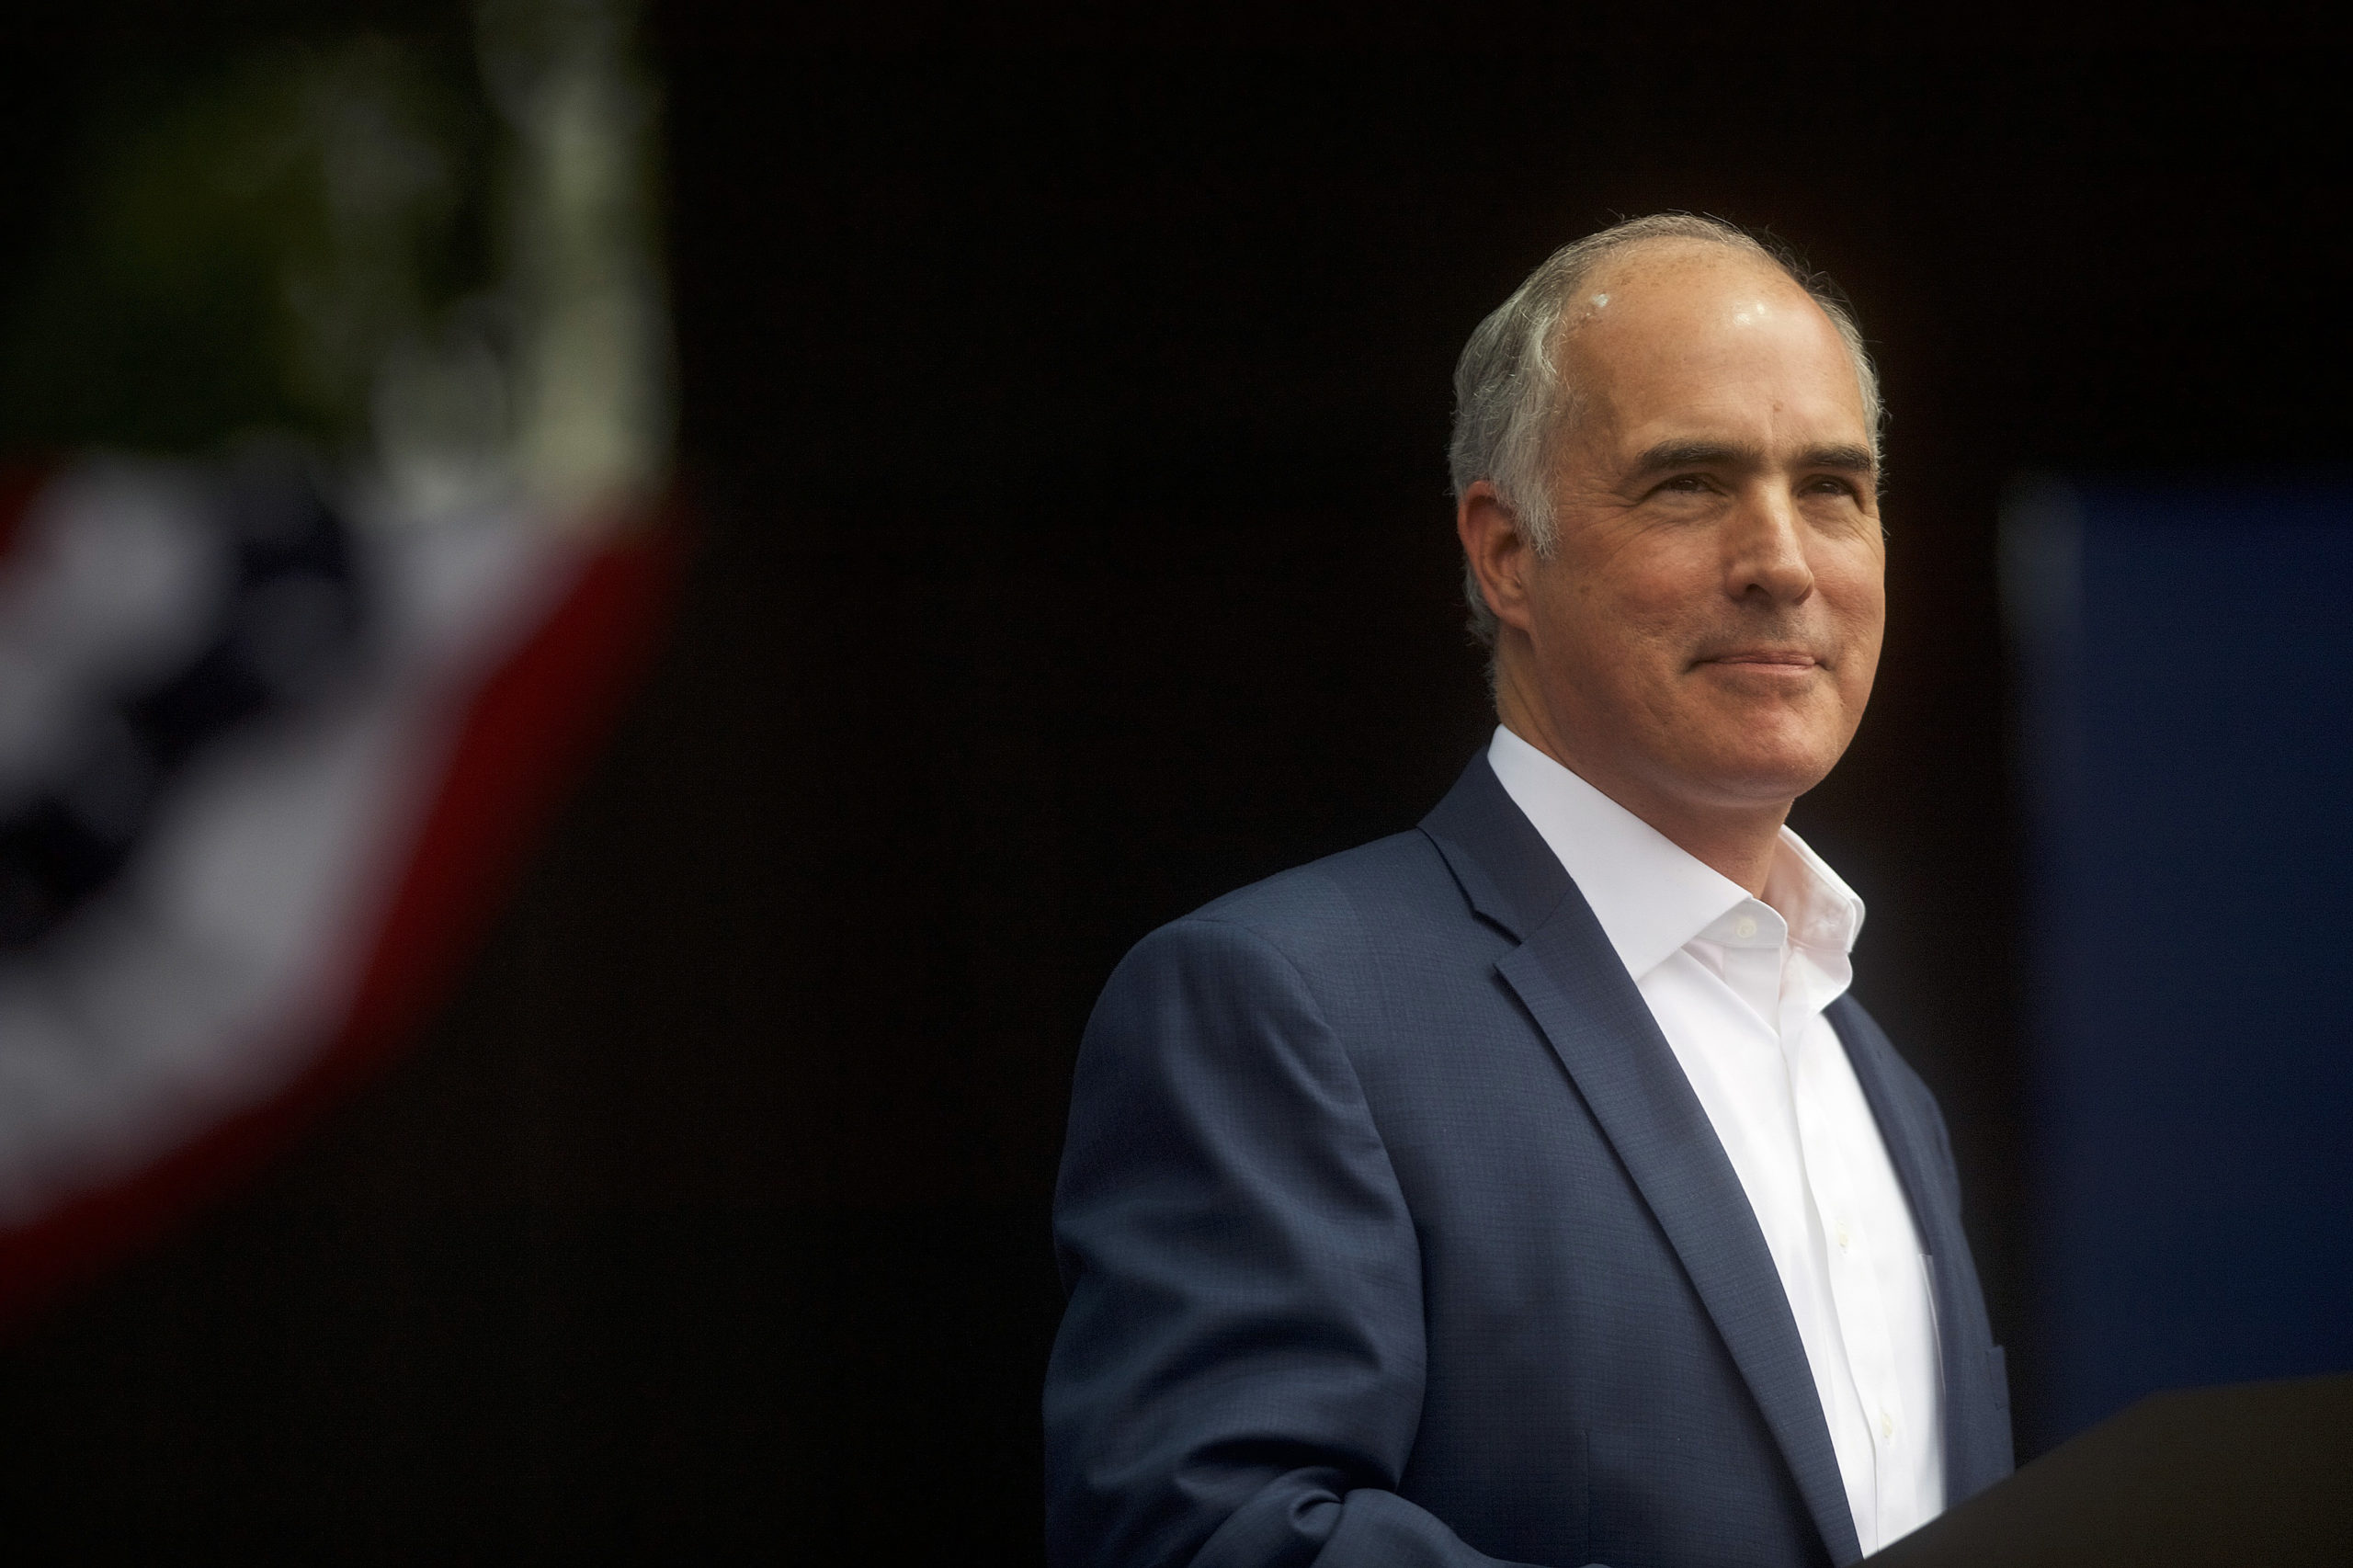 PHILADELPHIA, PA - SEPTEMBER 21: Senator Bob Casey (D- PA) addresses supporters before former President Barack Obama speaks during a campaign rally for statewide Democratic candidates on September 21, 2018 in Philadelphia, Pennsylvania. Midterm election day is November 6th. (Photo by Mark Makela/Getty Images)